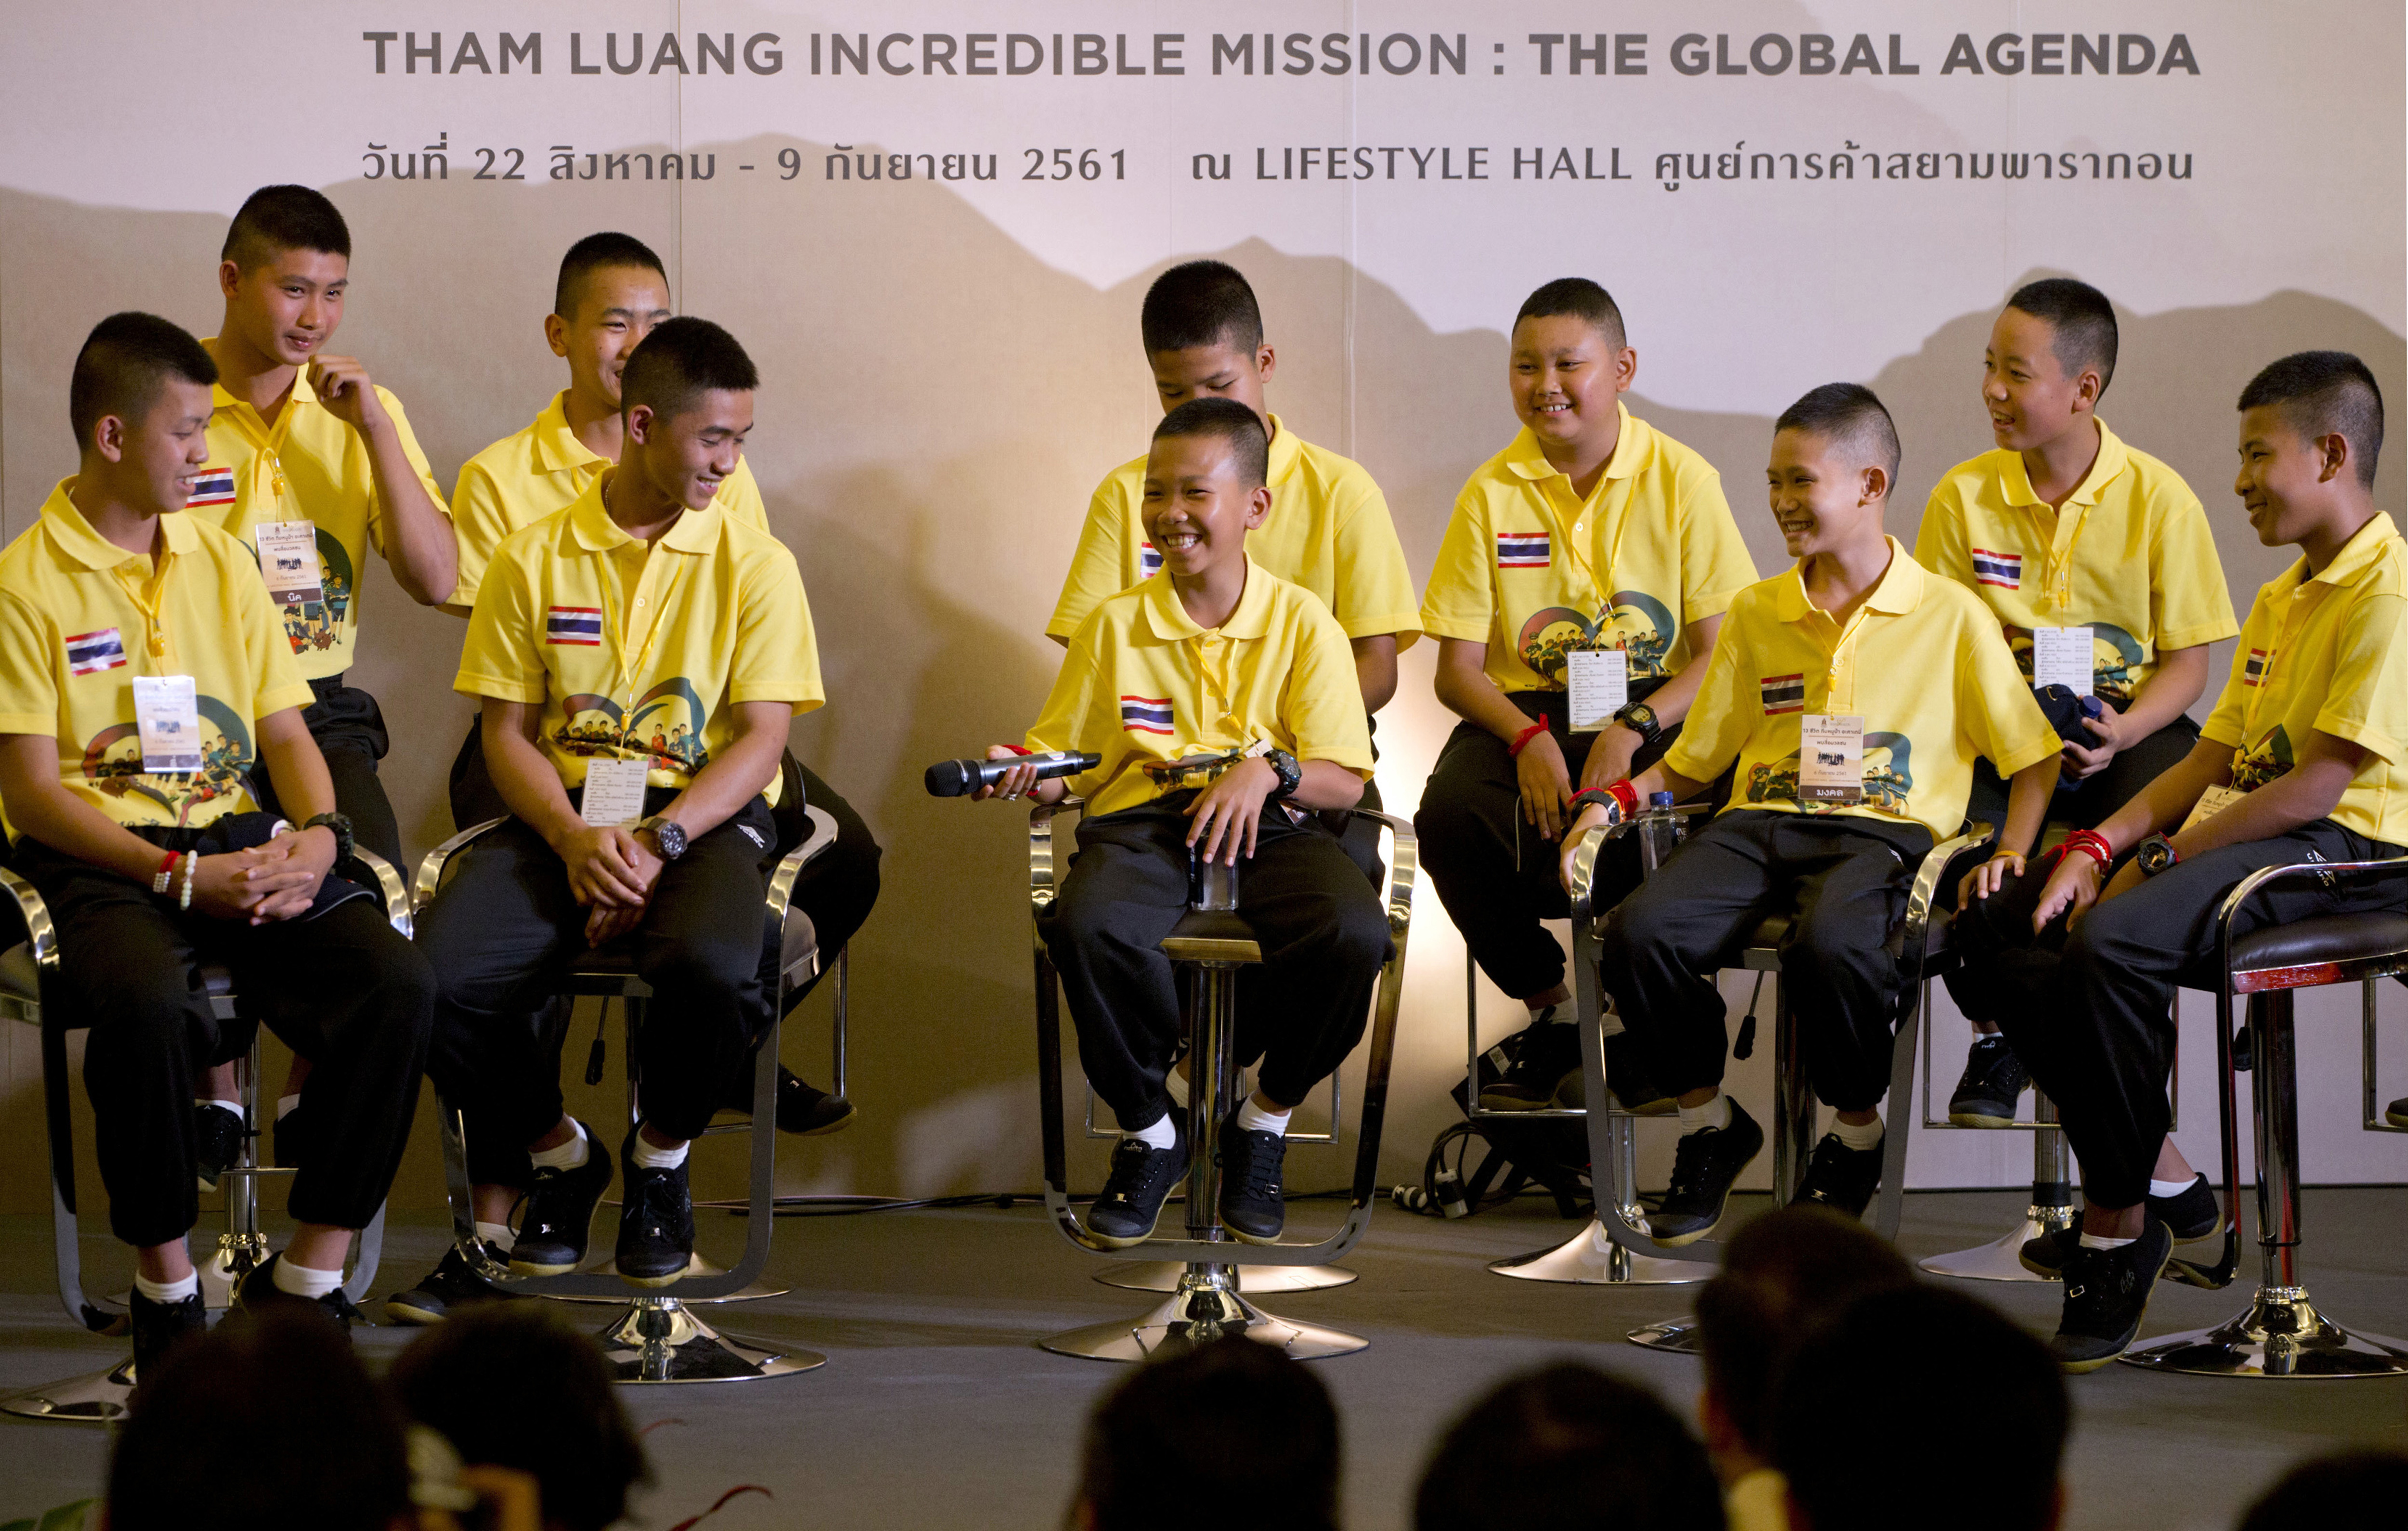 Members of the Wild Boars team laugh during a media conference